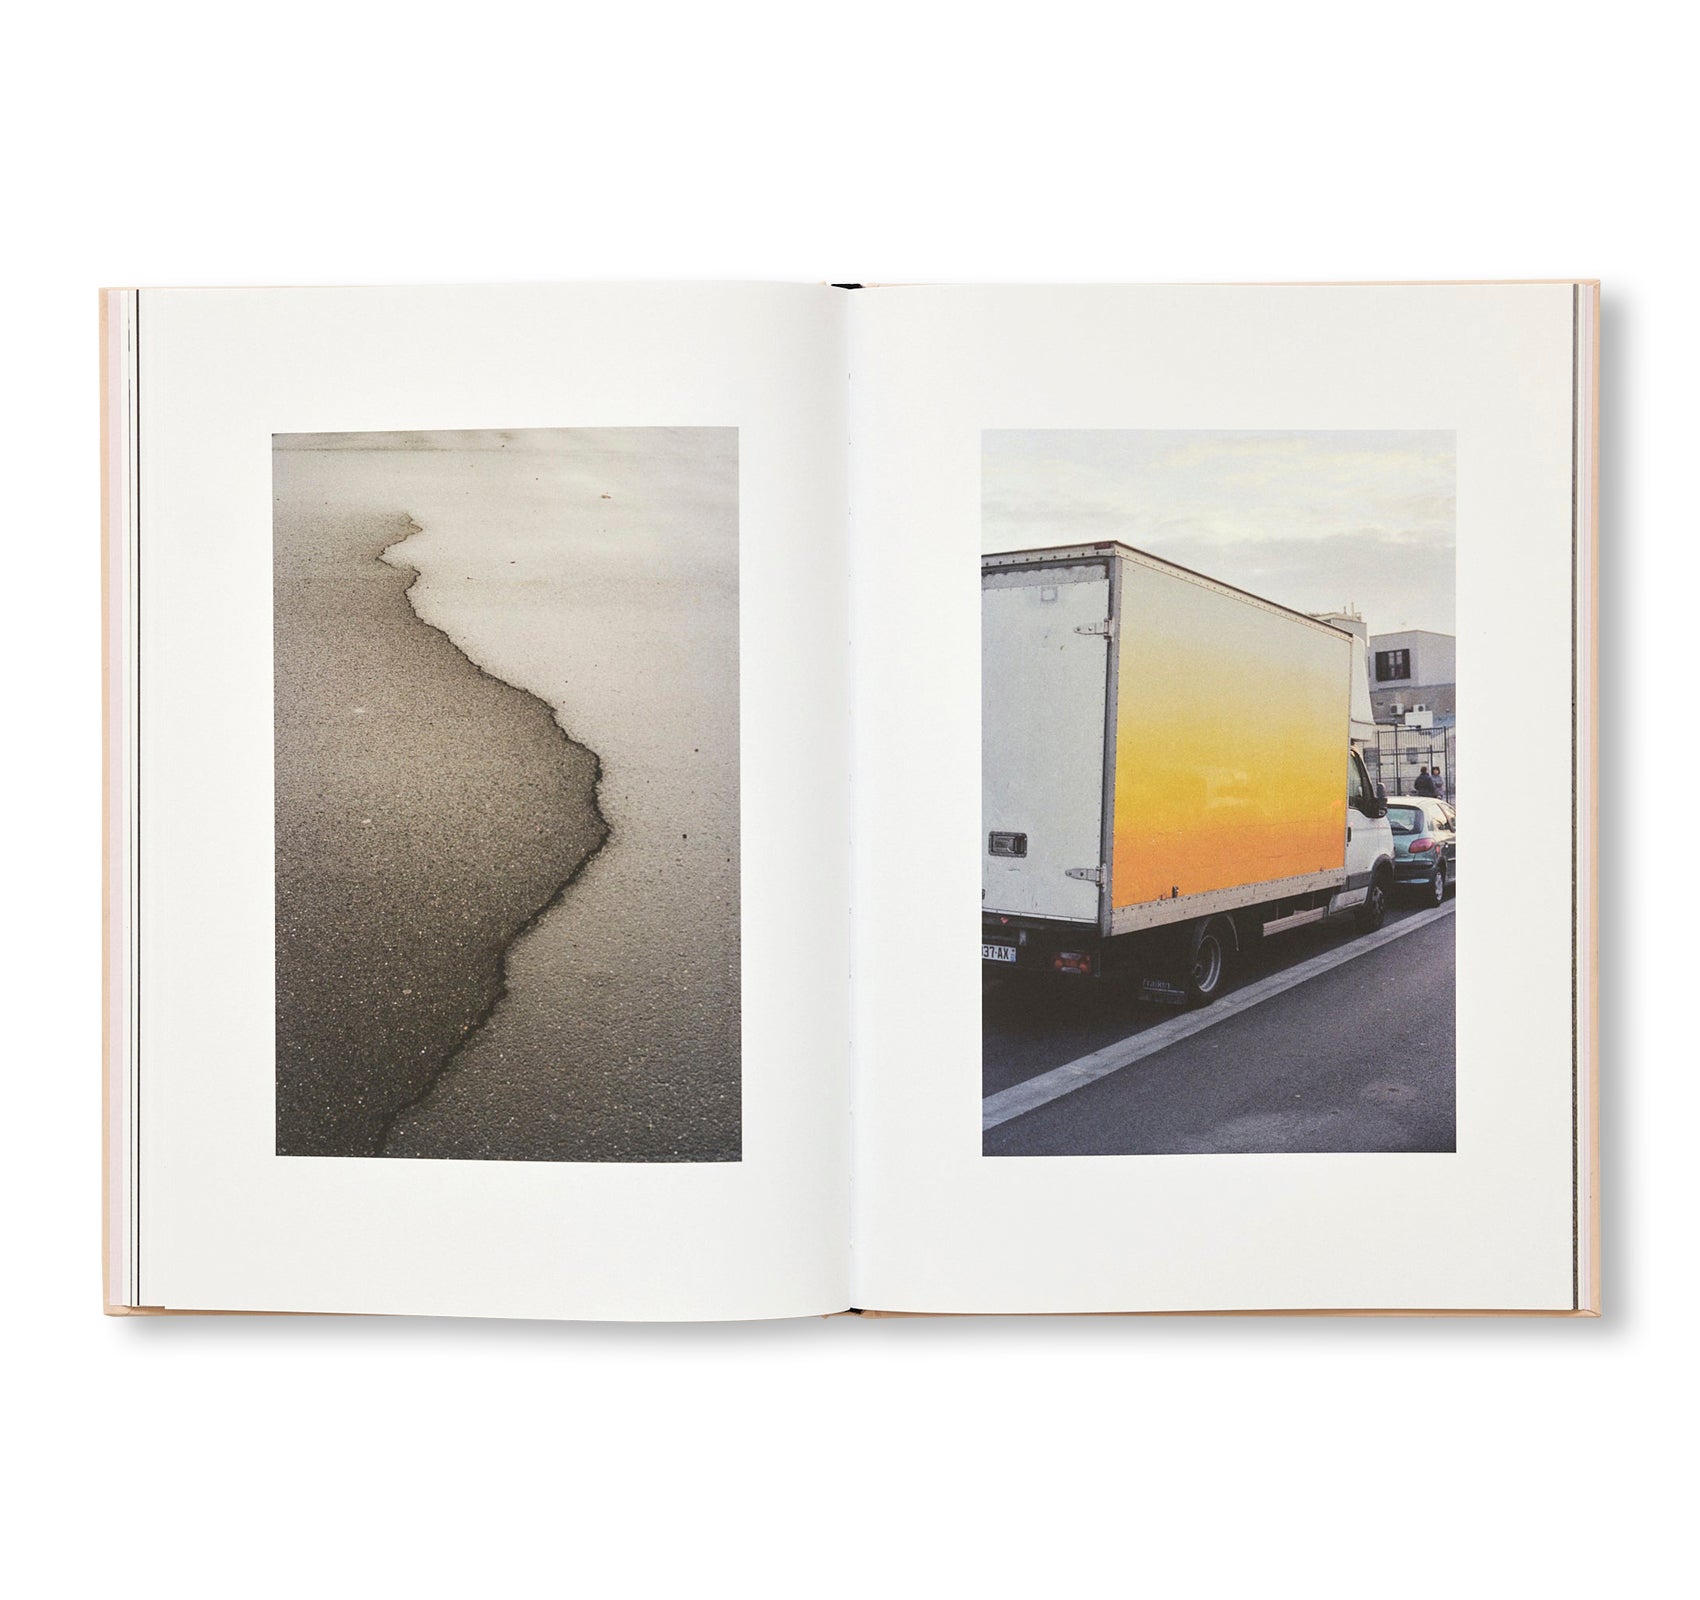 THE CLOUD, THE BIRD AND THE PUDDLE by Ola Rindal [SIGNED]